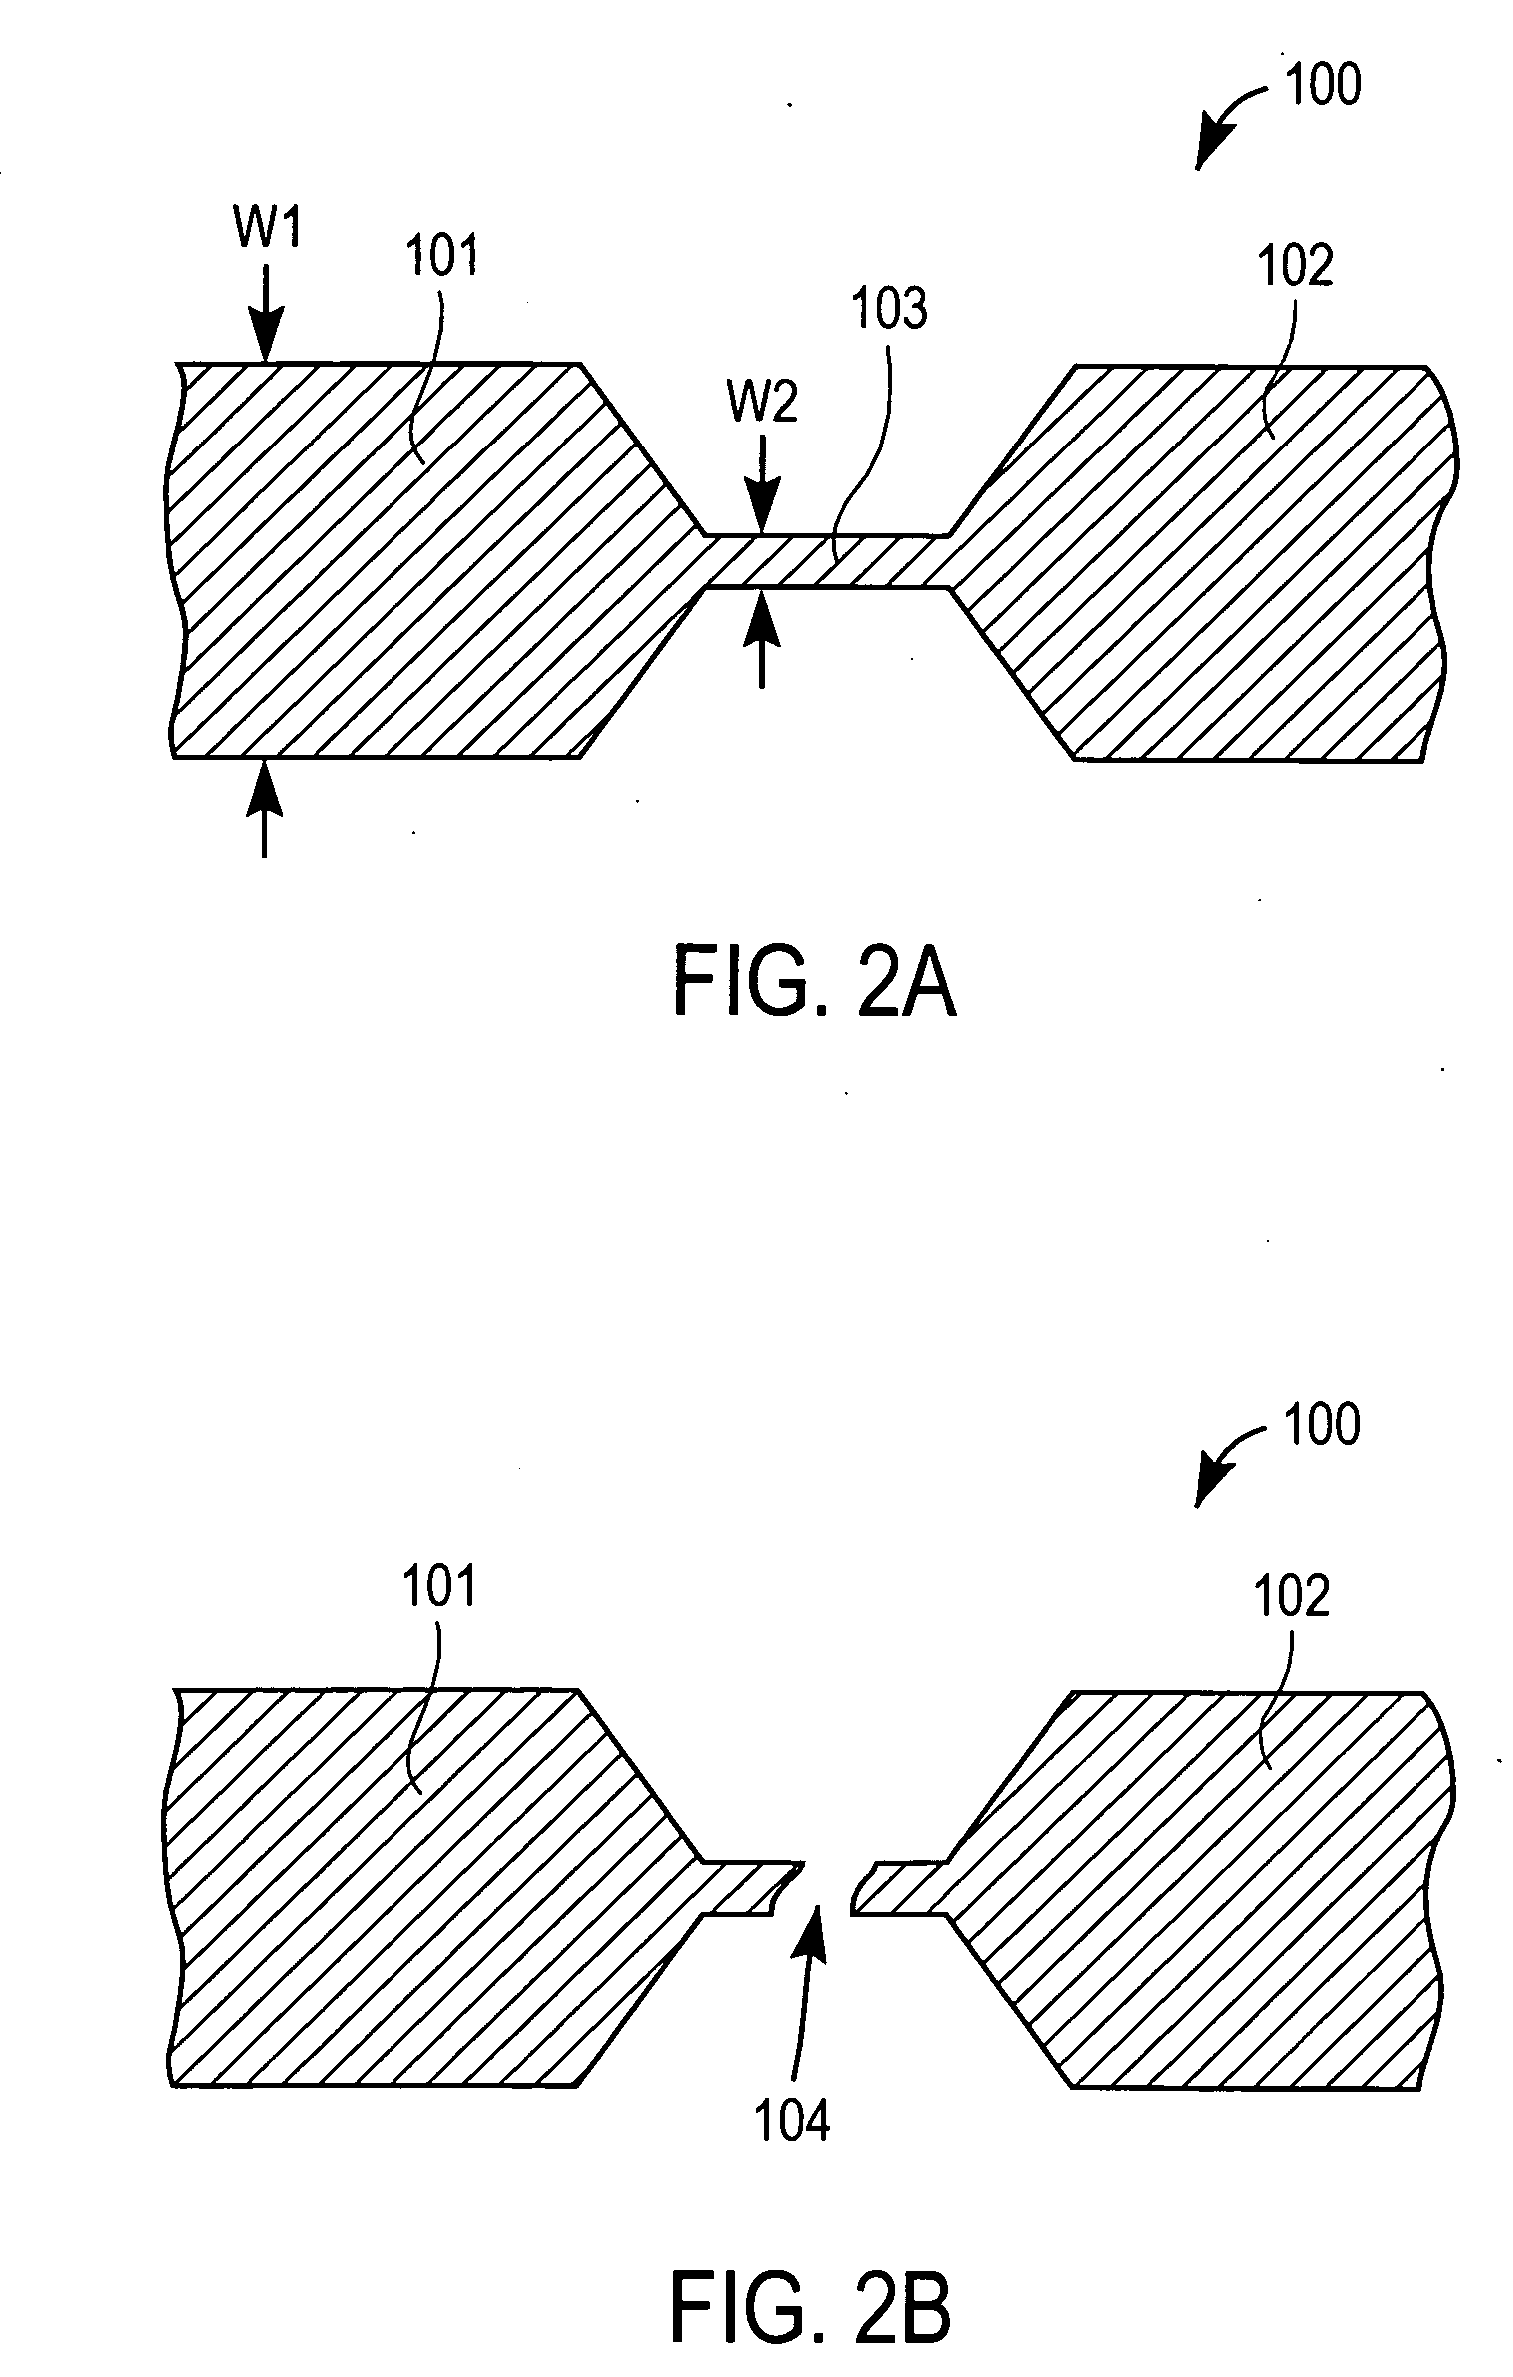 Method of preventing reuse in an analyte measuring system